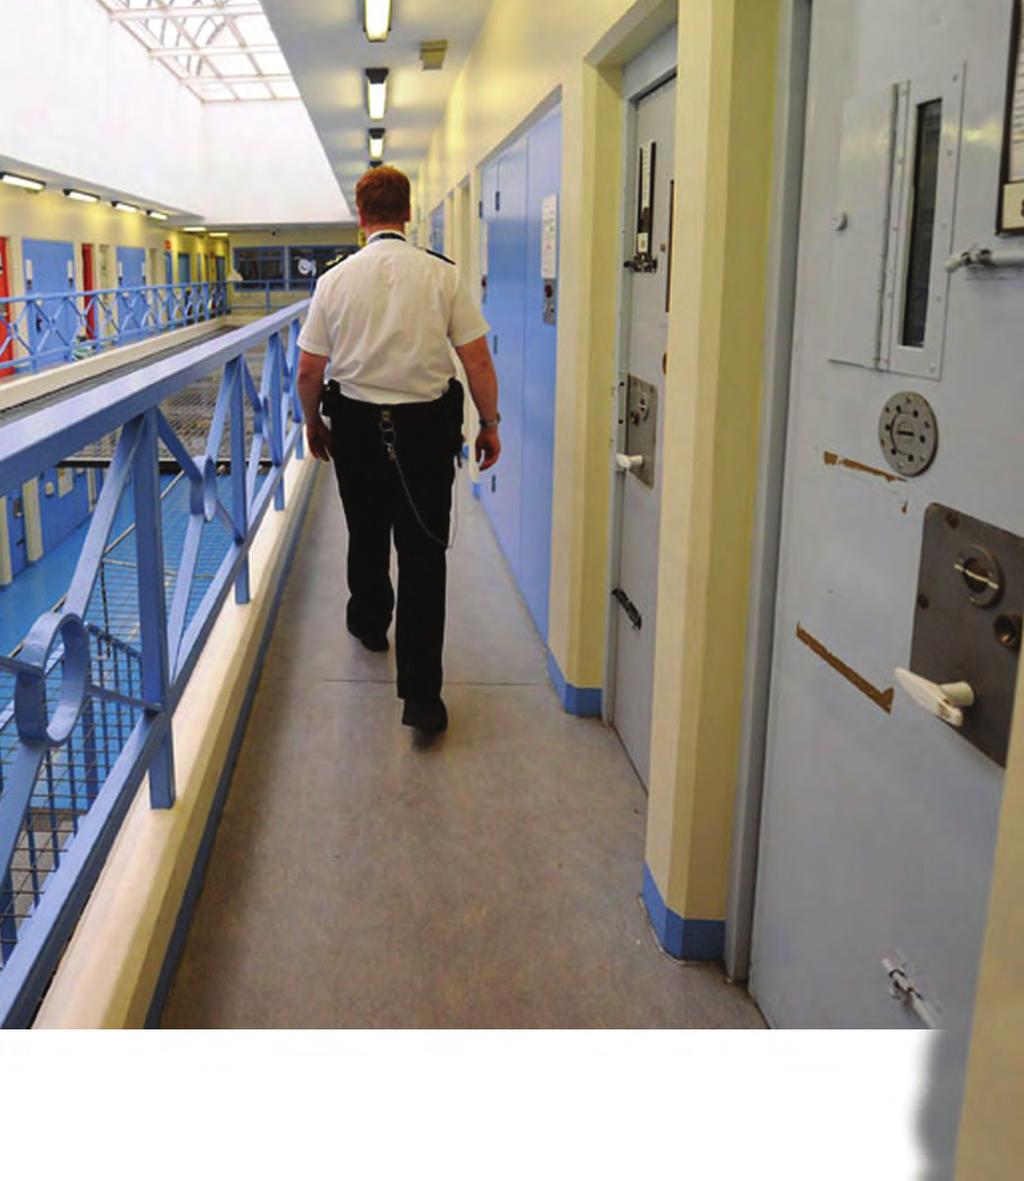 Staff and prisoners are regularly put at risk because of unsafe staffing levels.